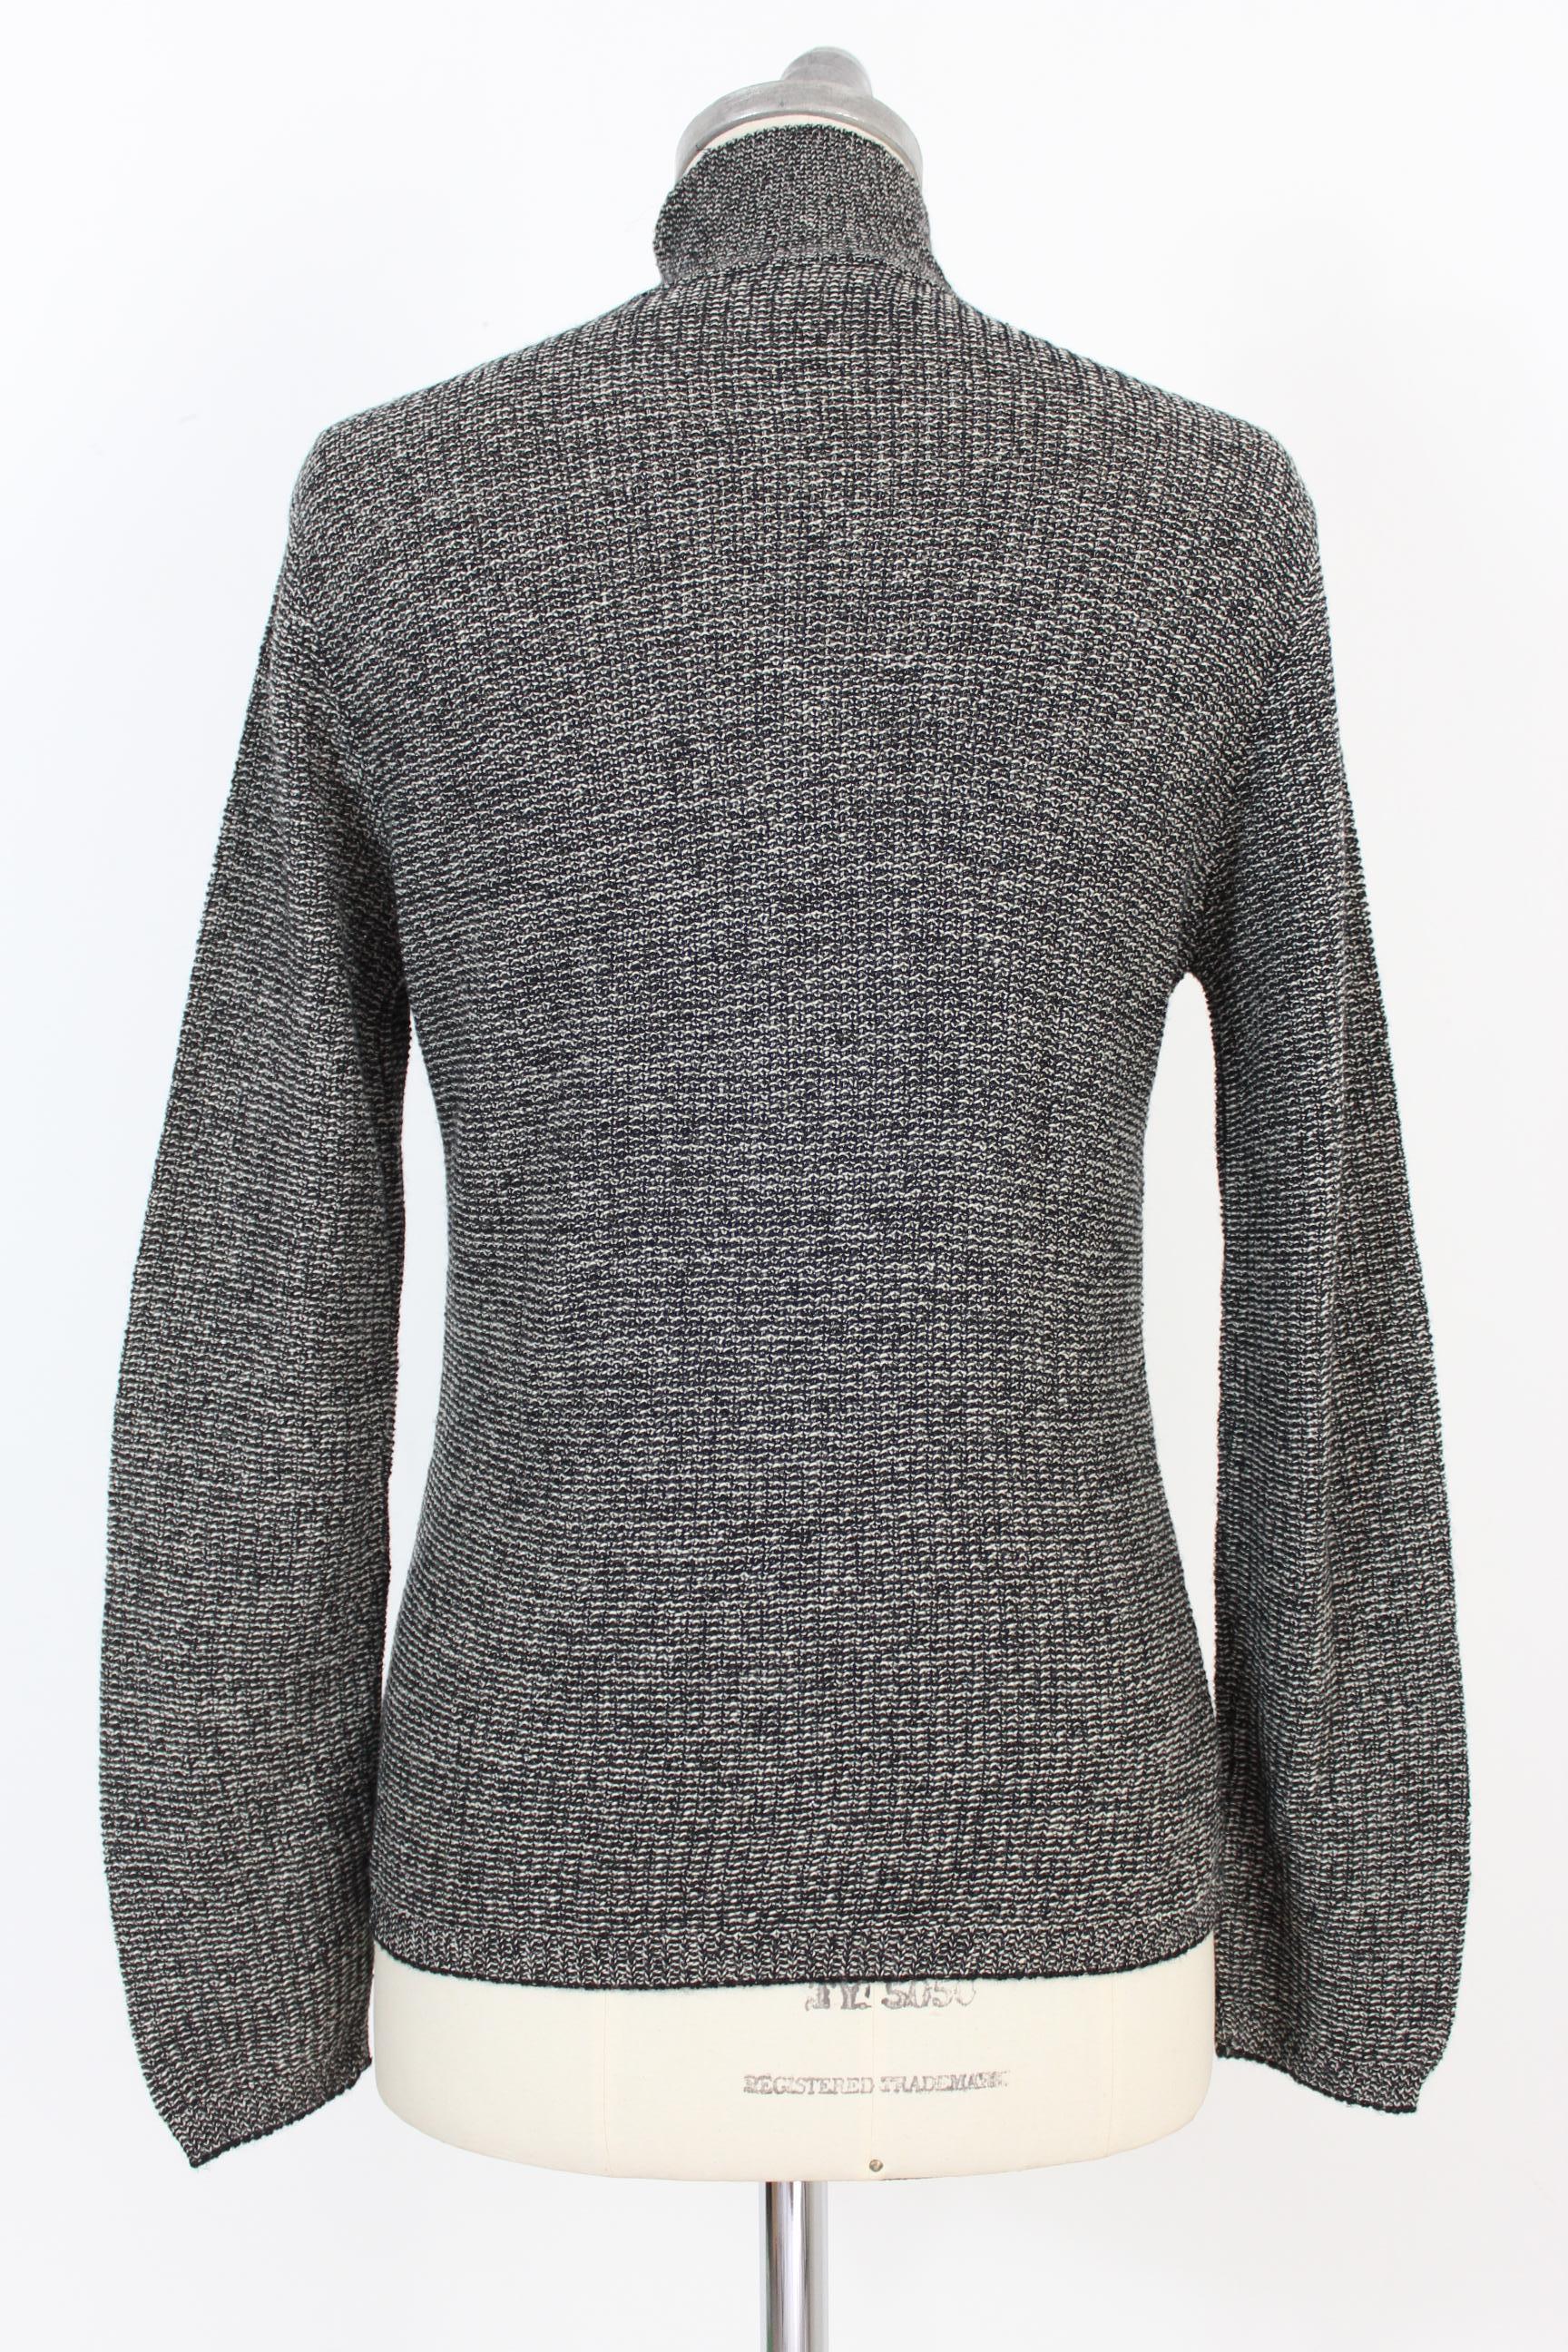 Genny vintage cashmere sweater 80s. Turtleneck model with salt and pepper texture. Warm and soft. Casual style. Composition 57% wool, 38% kashmir, 5% polyester. Made in Italy. Excellent vintage conditions.

Size: 42 It 8 Us 10 uk

Shoulder: 42 cm